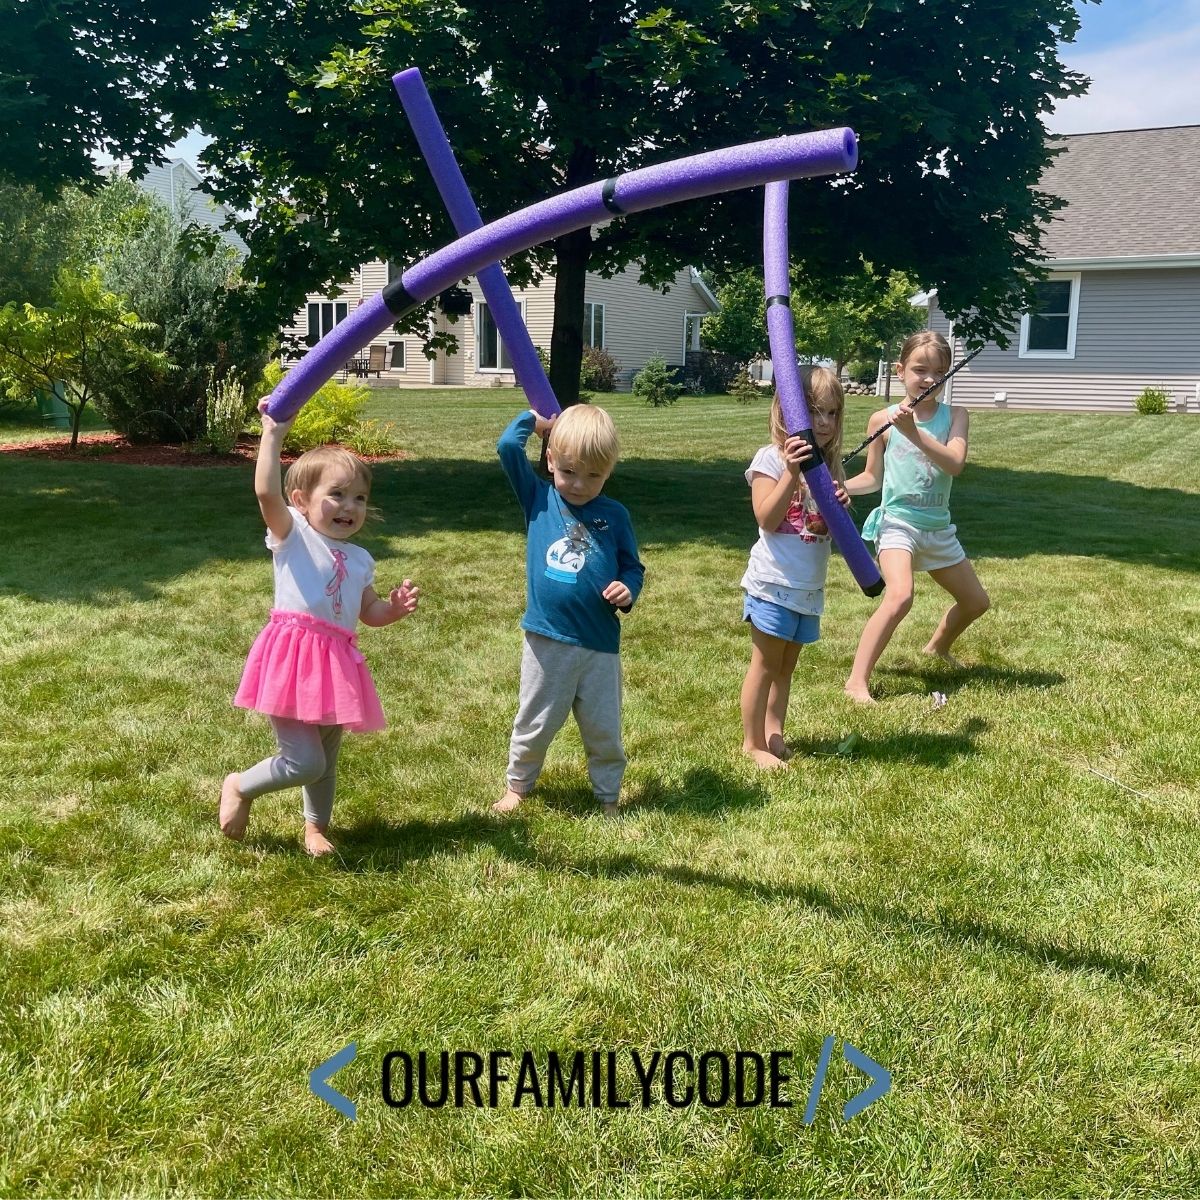 A picture of kids throwing javelin pool noodles in the backyard.